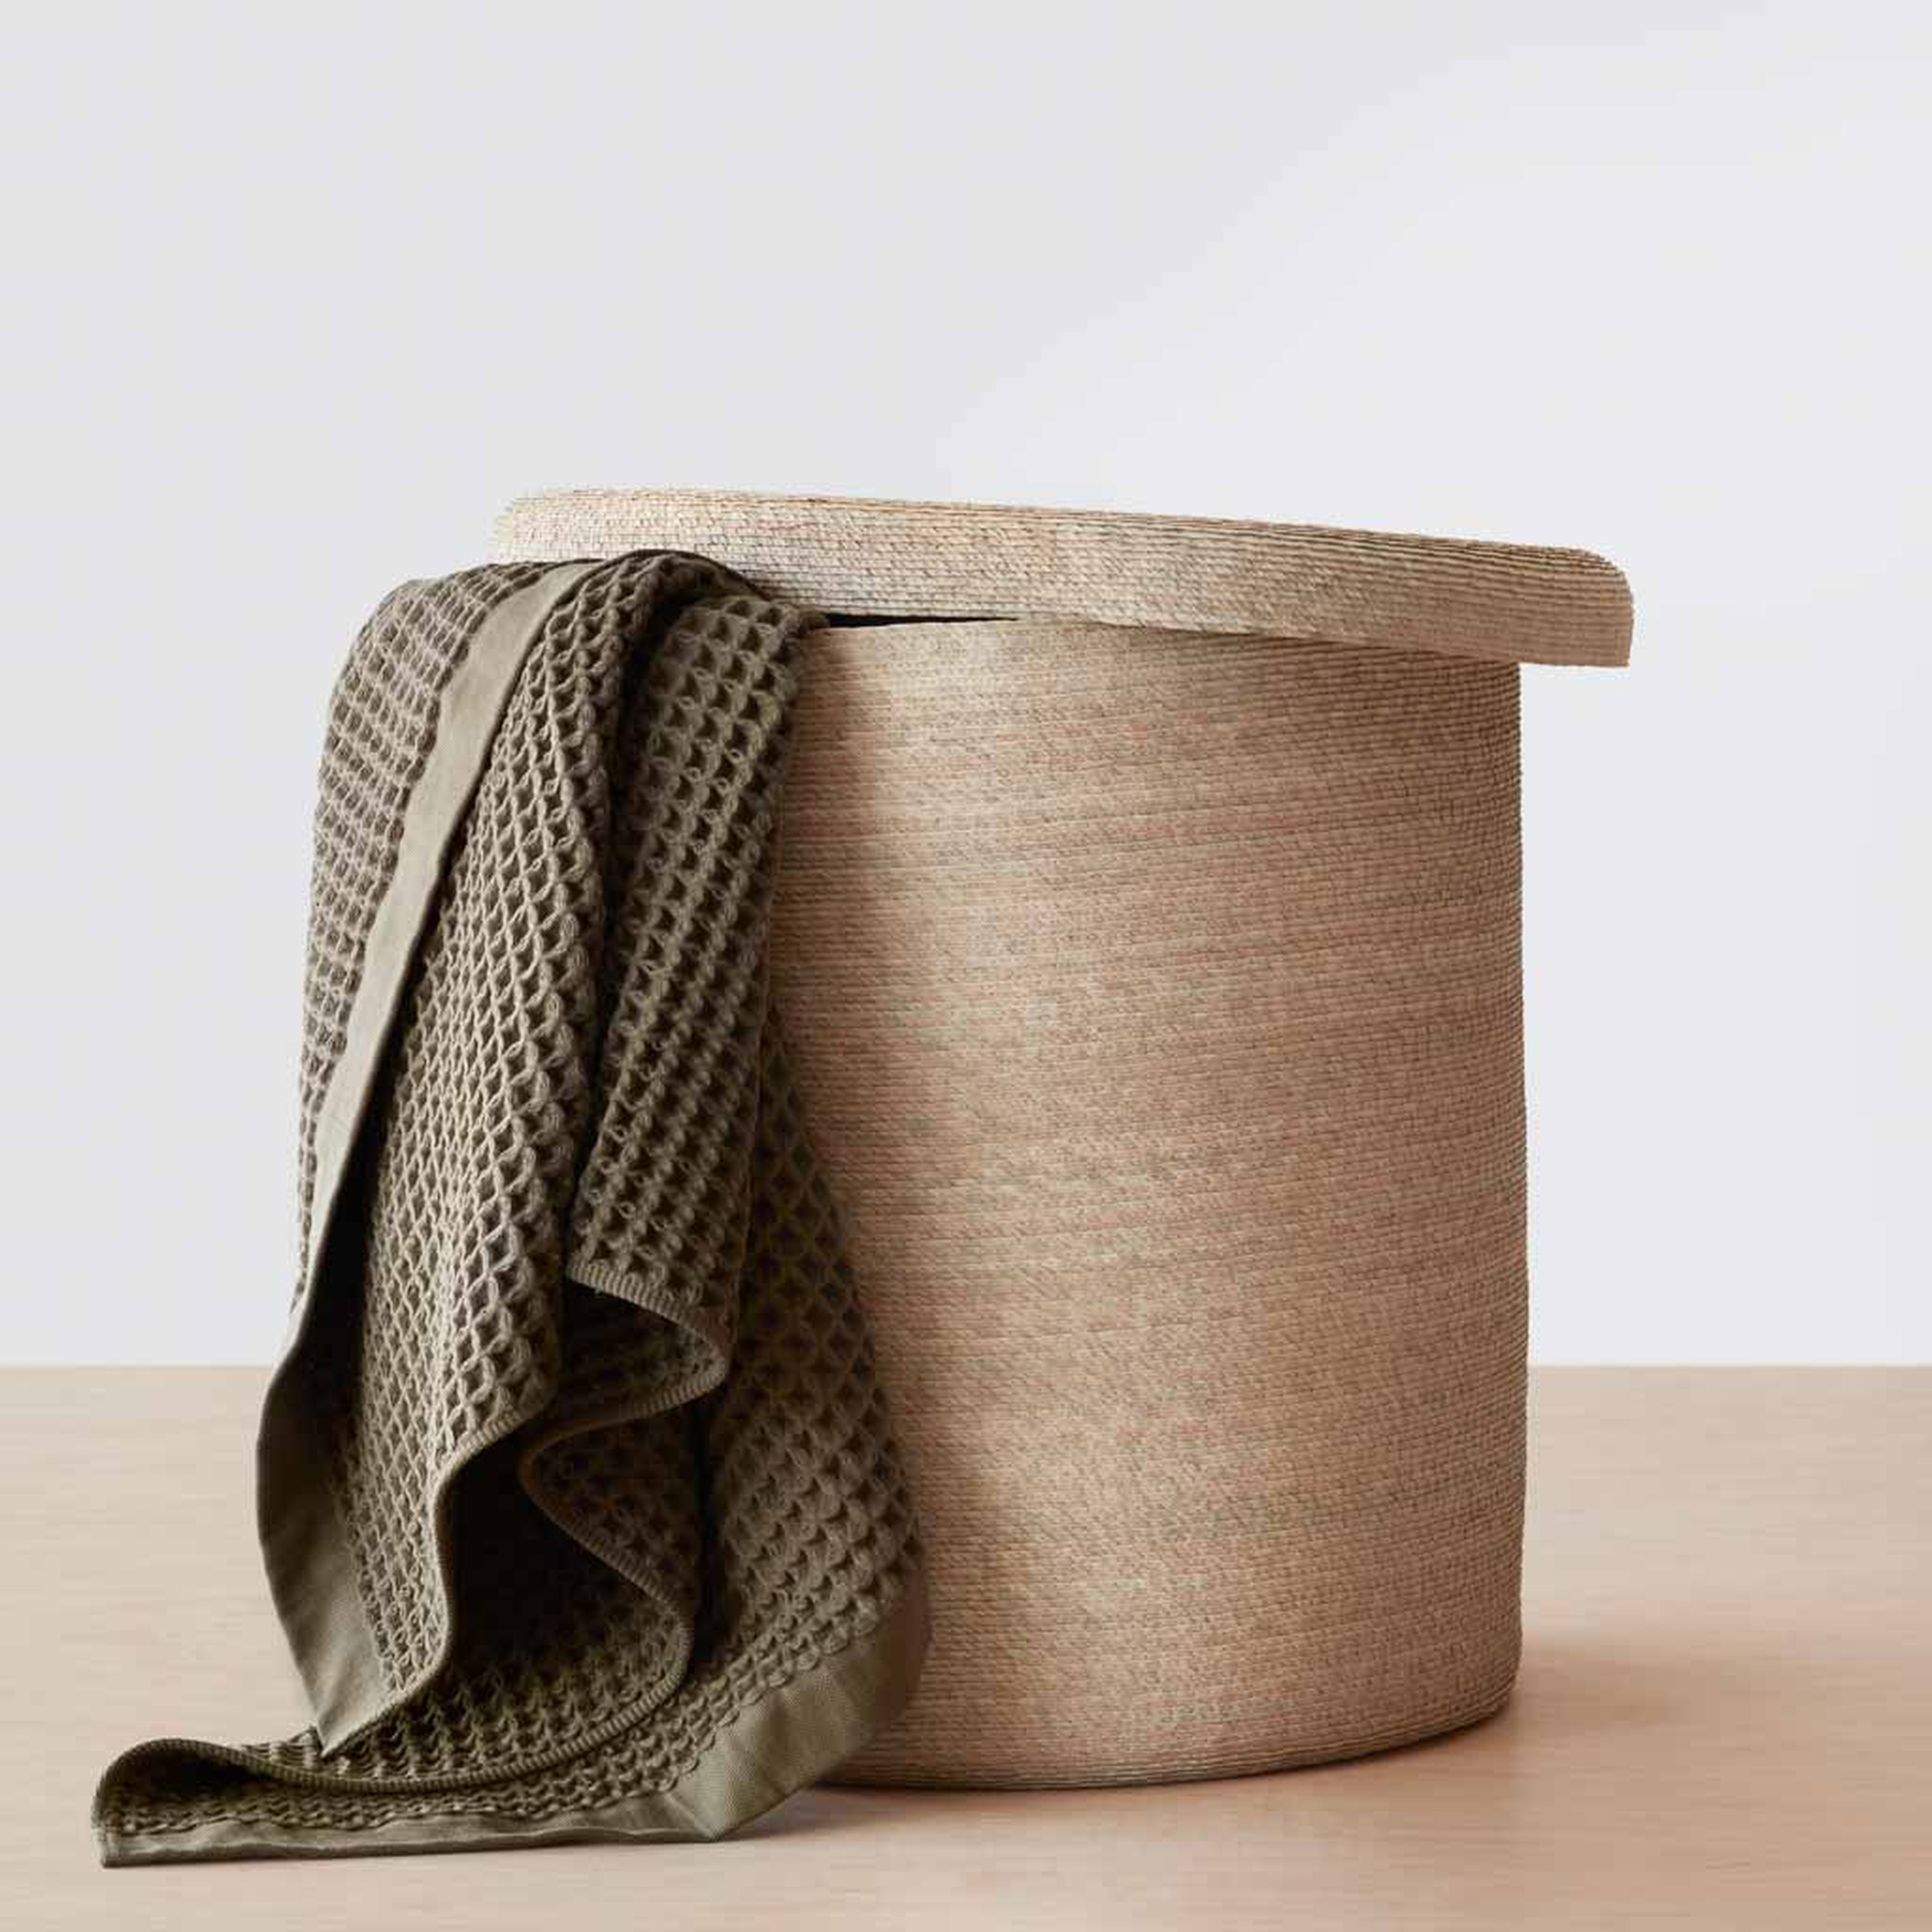 Mercado Lidded Storage Baskets - Natural - Medium By The Citizenry - The Citizenry